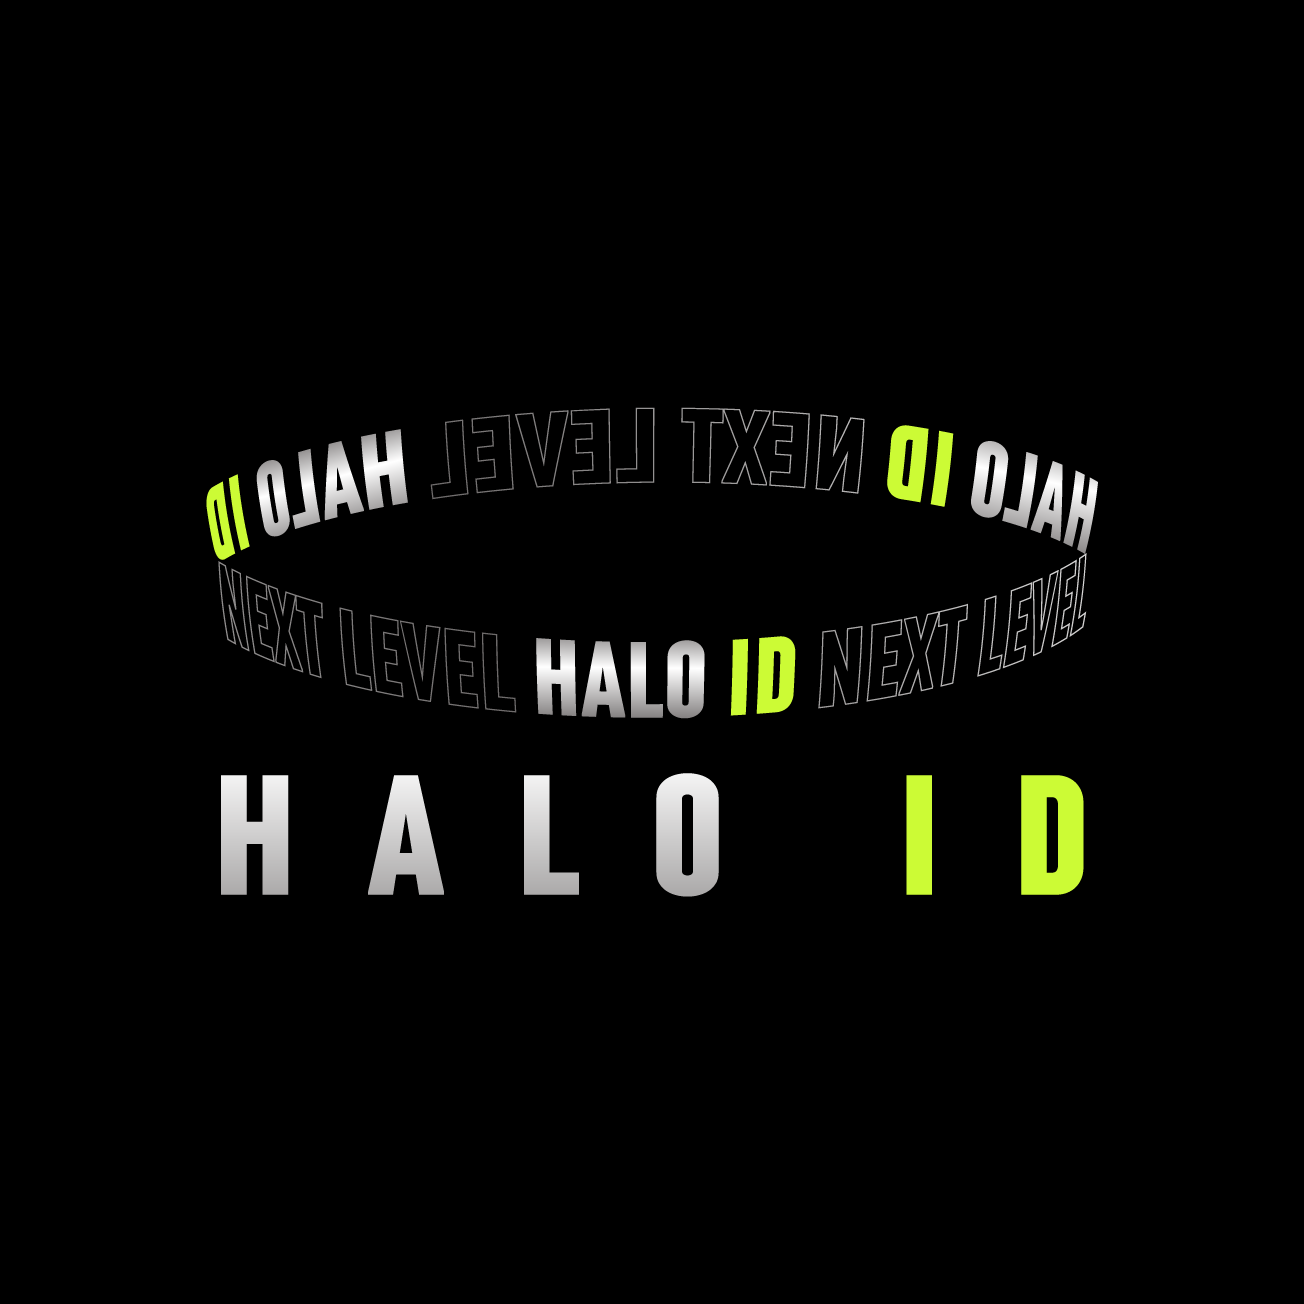 Club Image for HALO ID